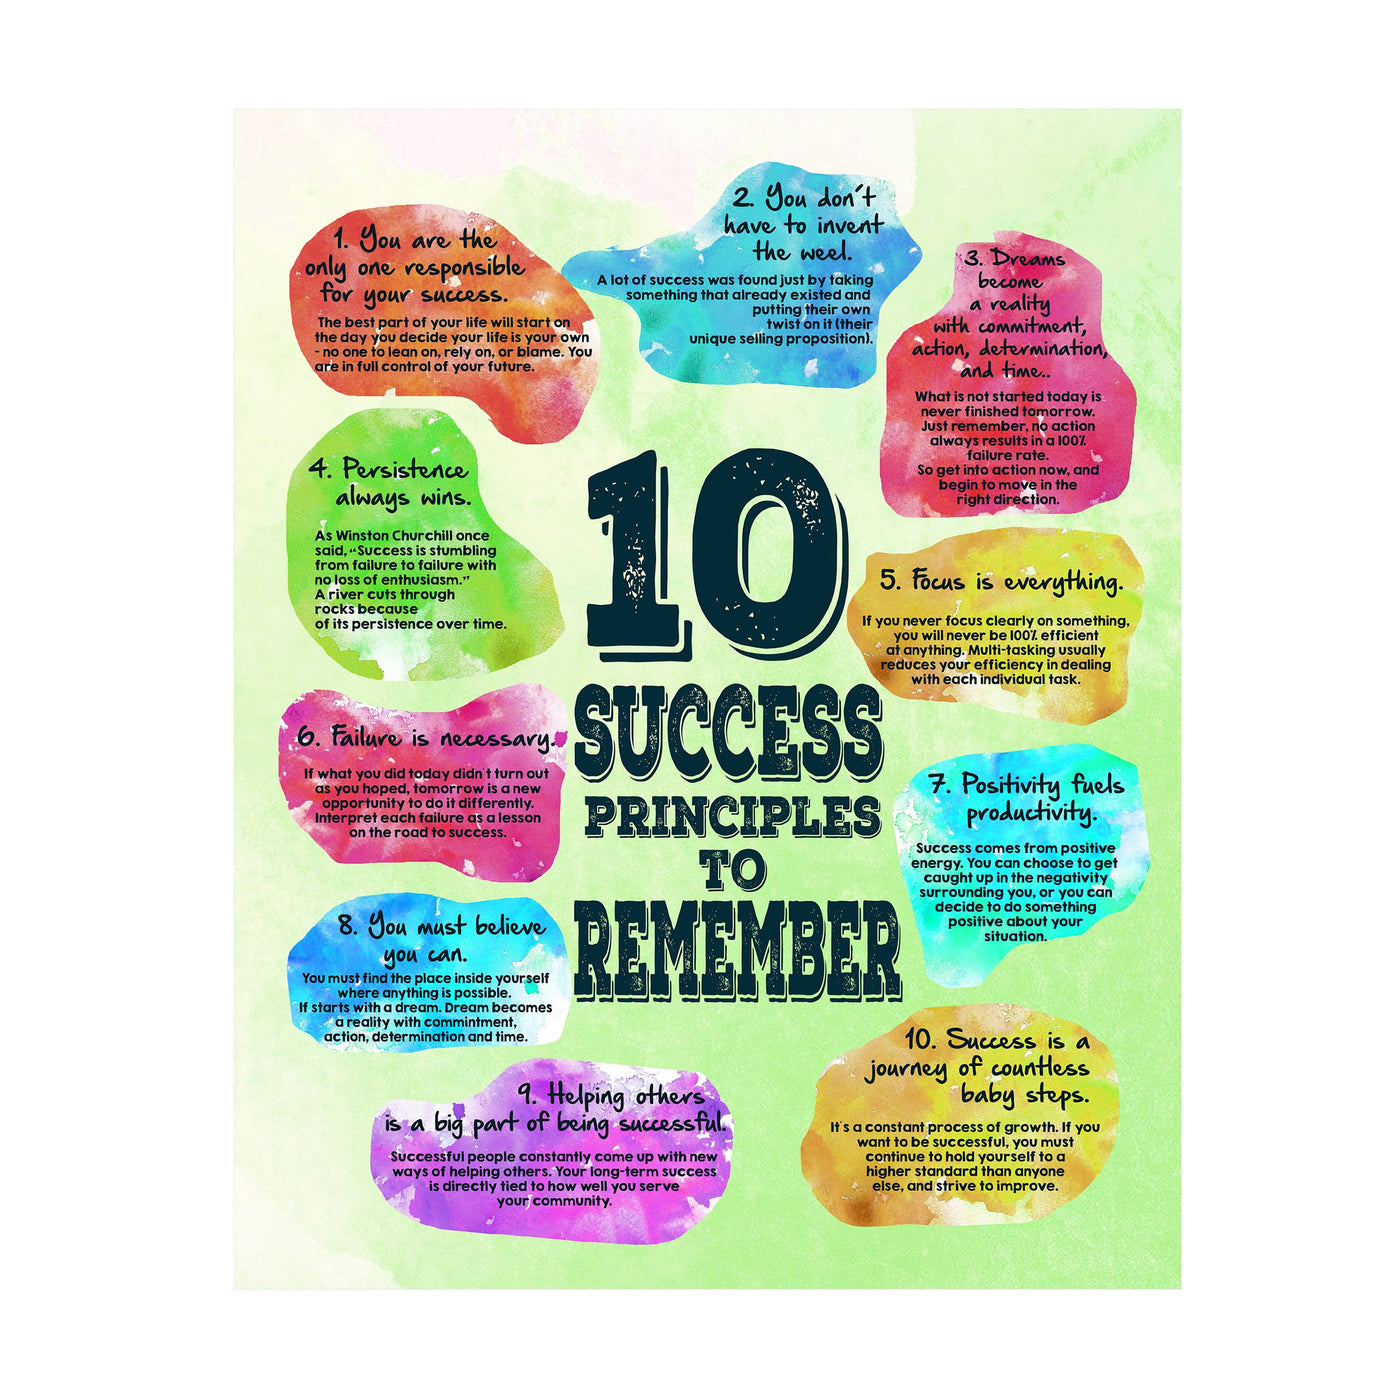 10 Success Principles-Inspirational Life Quotes Wall Art Sign -11 x 14" Colorful Motivational Typography Print -Ready to Frame. Home-Office-Classroom-Dorm-Work Decor. Great Gift of Motivation!